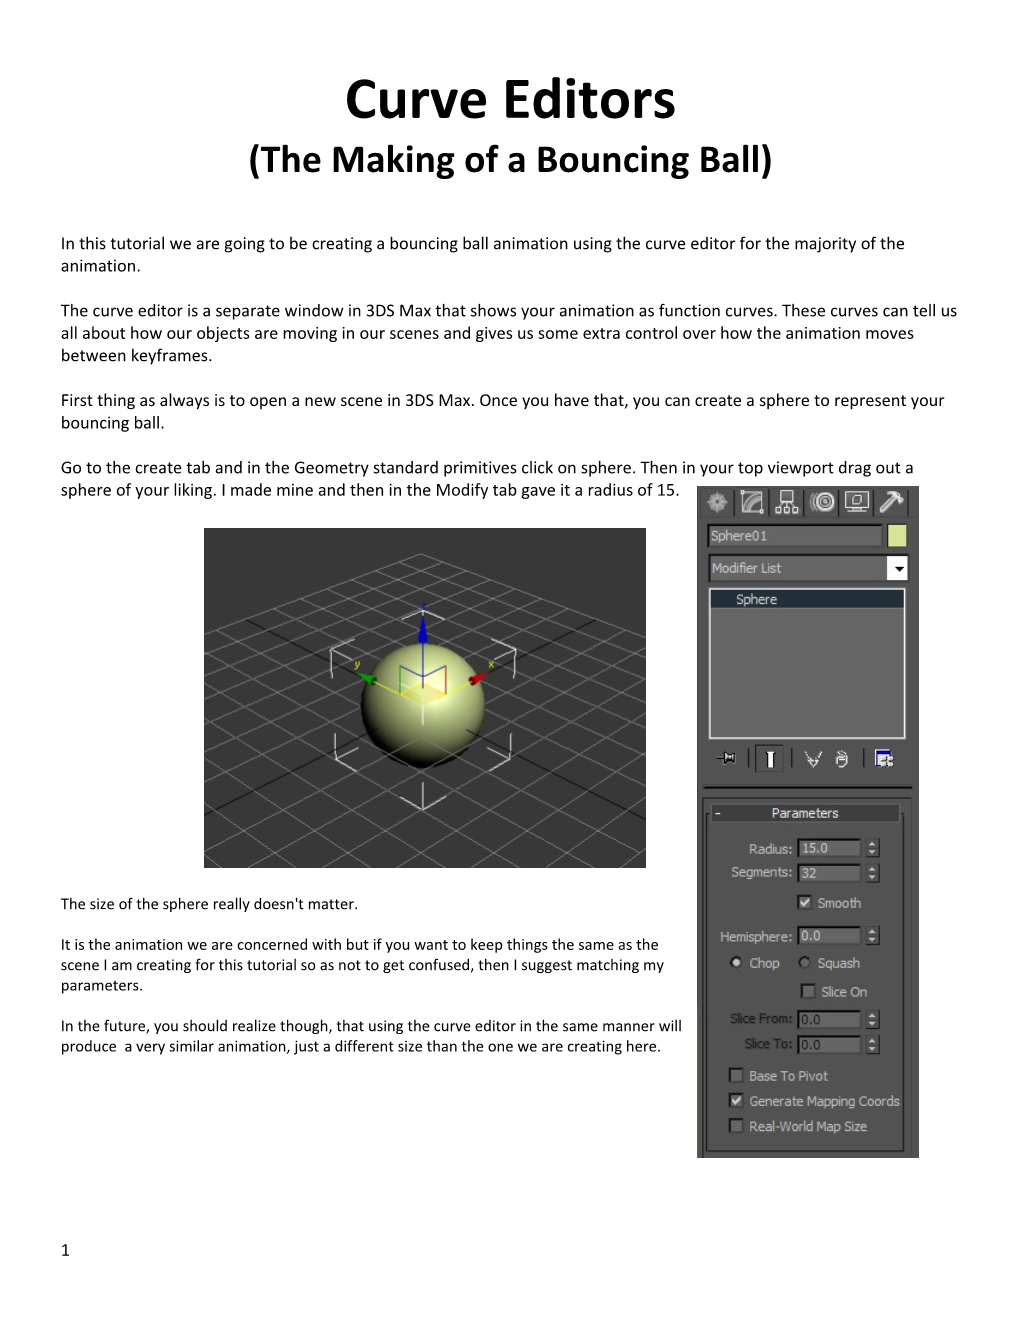 The Making of a Bouncing Ball